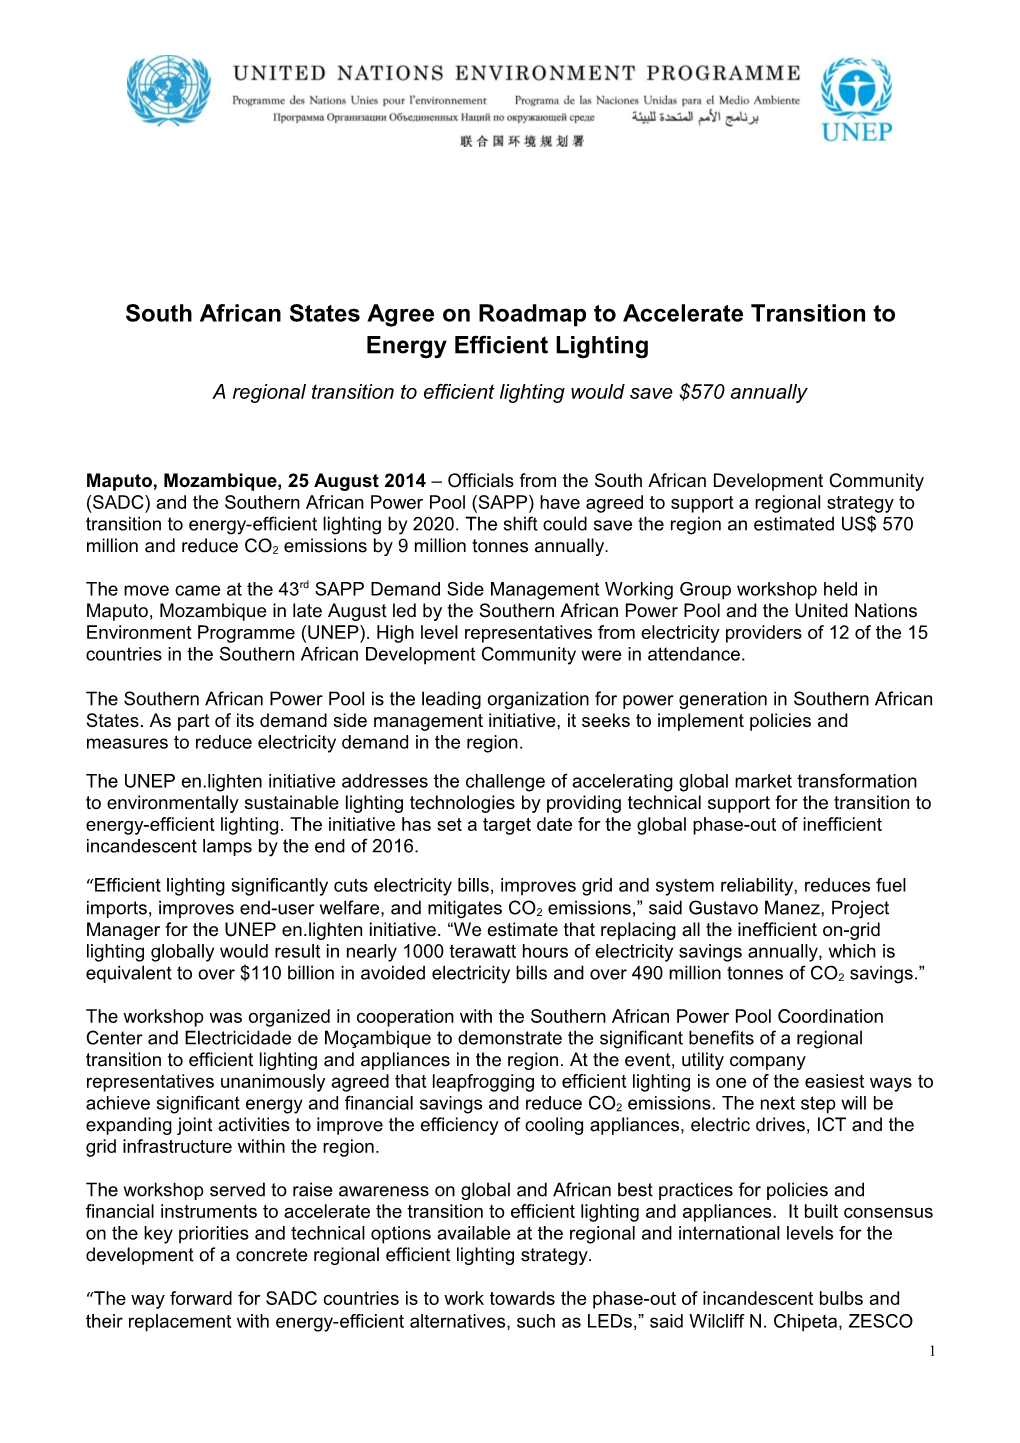 South African States Agree on Roadmap to Accelerate Transition to Energy Efficient Lighting